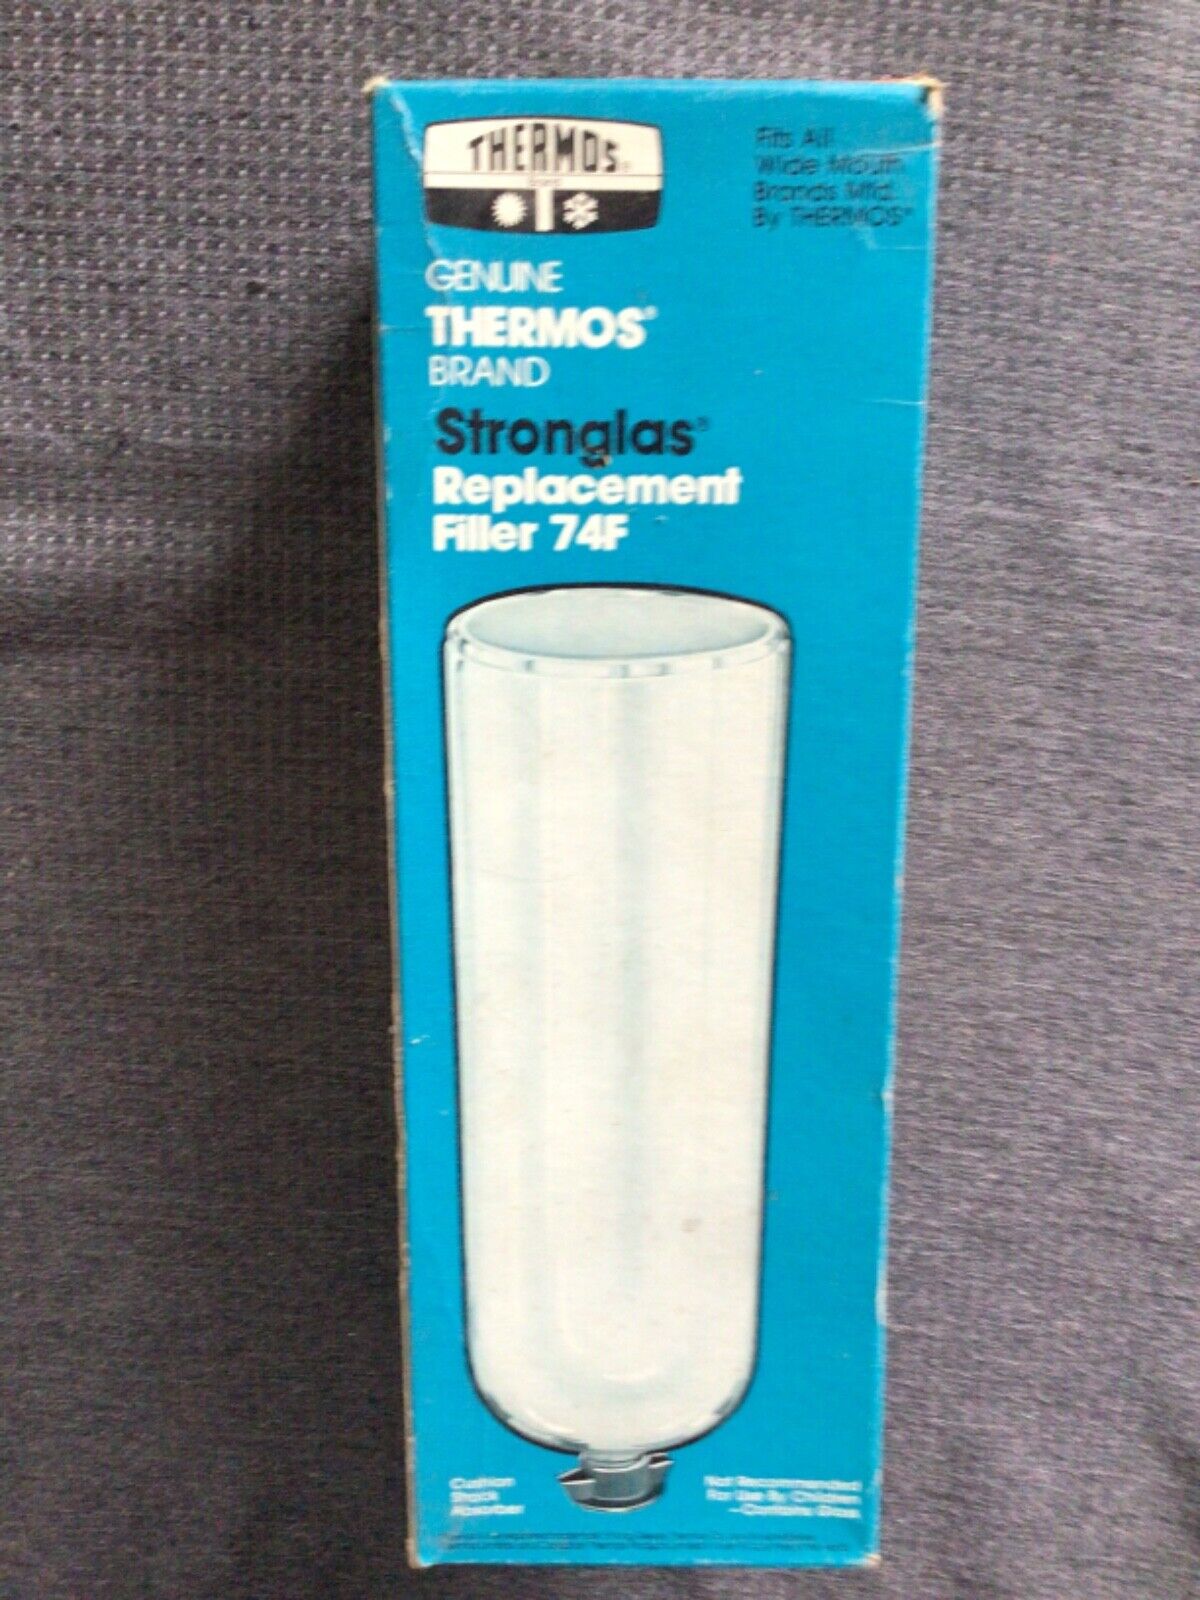 Vintage Genuine Thermos Replacement Liner Filler 74F